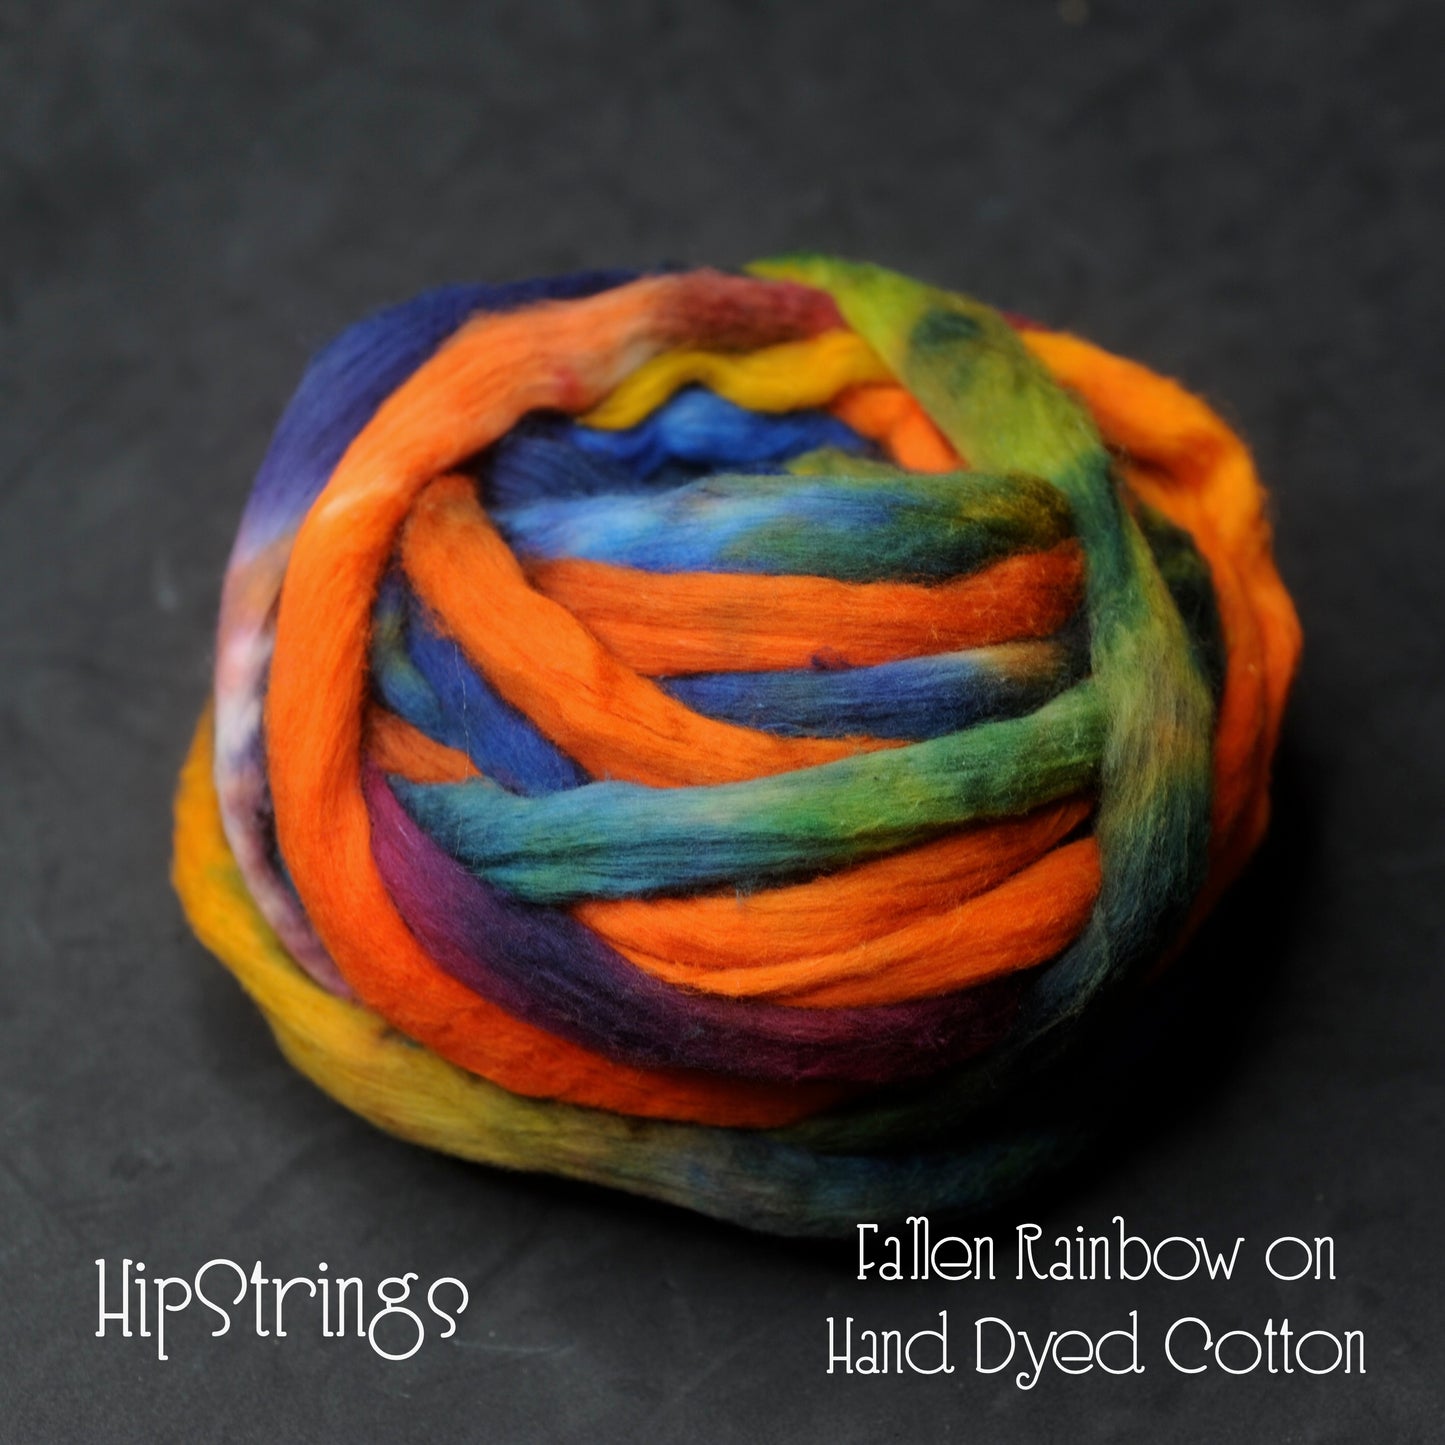 Fallen Rainbow on Hand Dyed Upland Cotton Carded Sliver - 2 oz